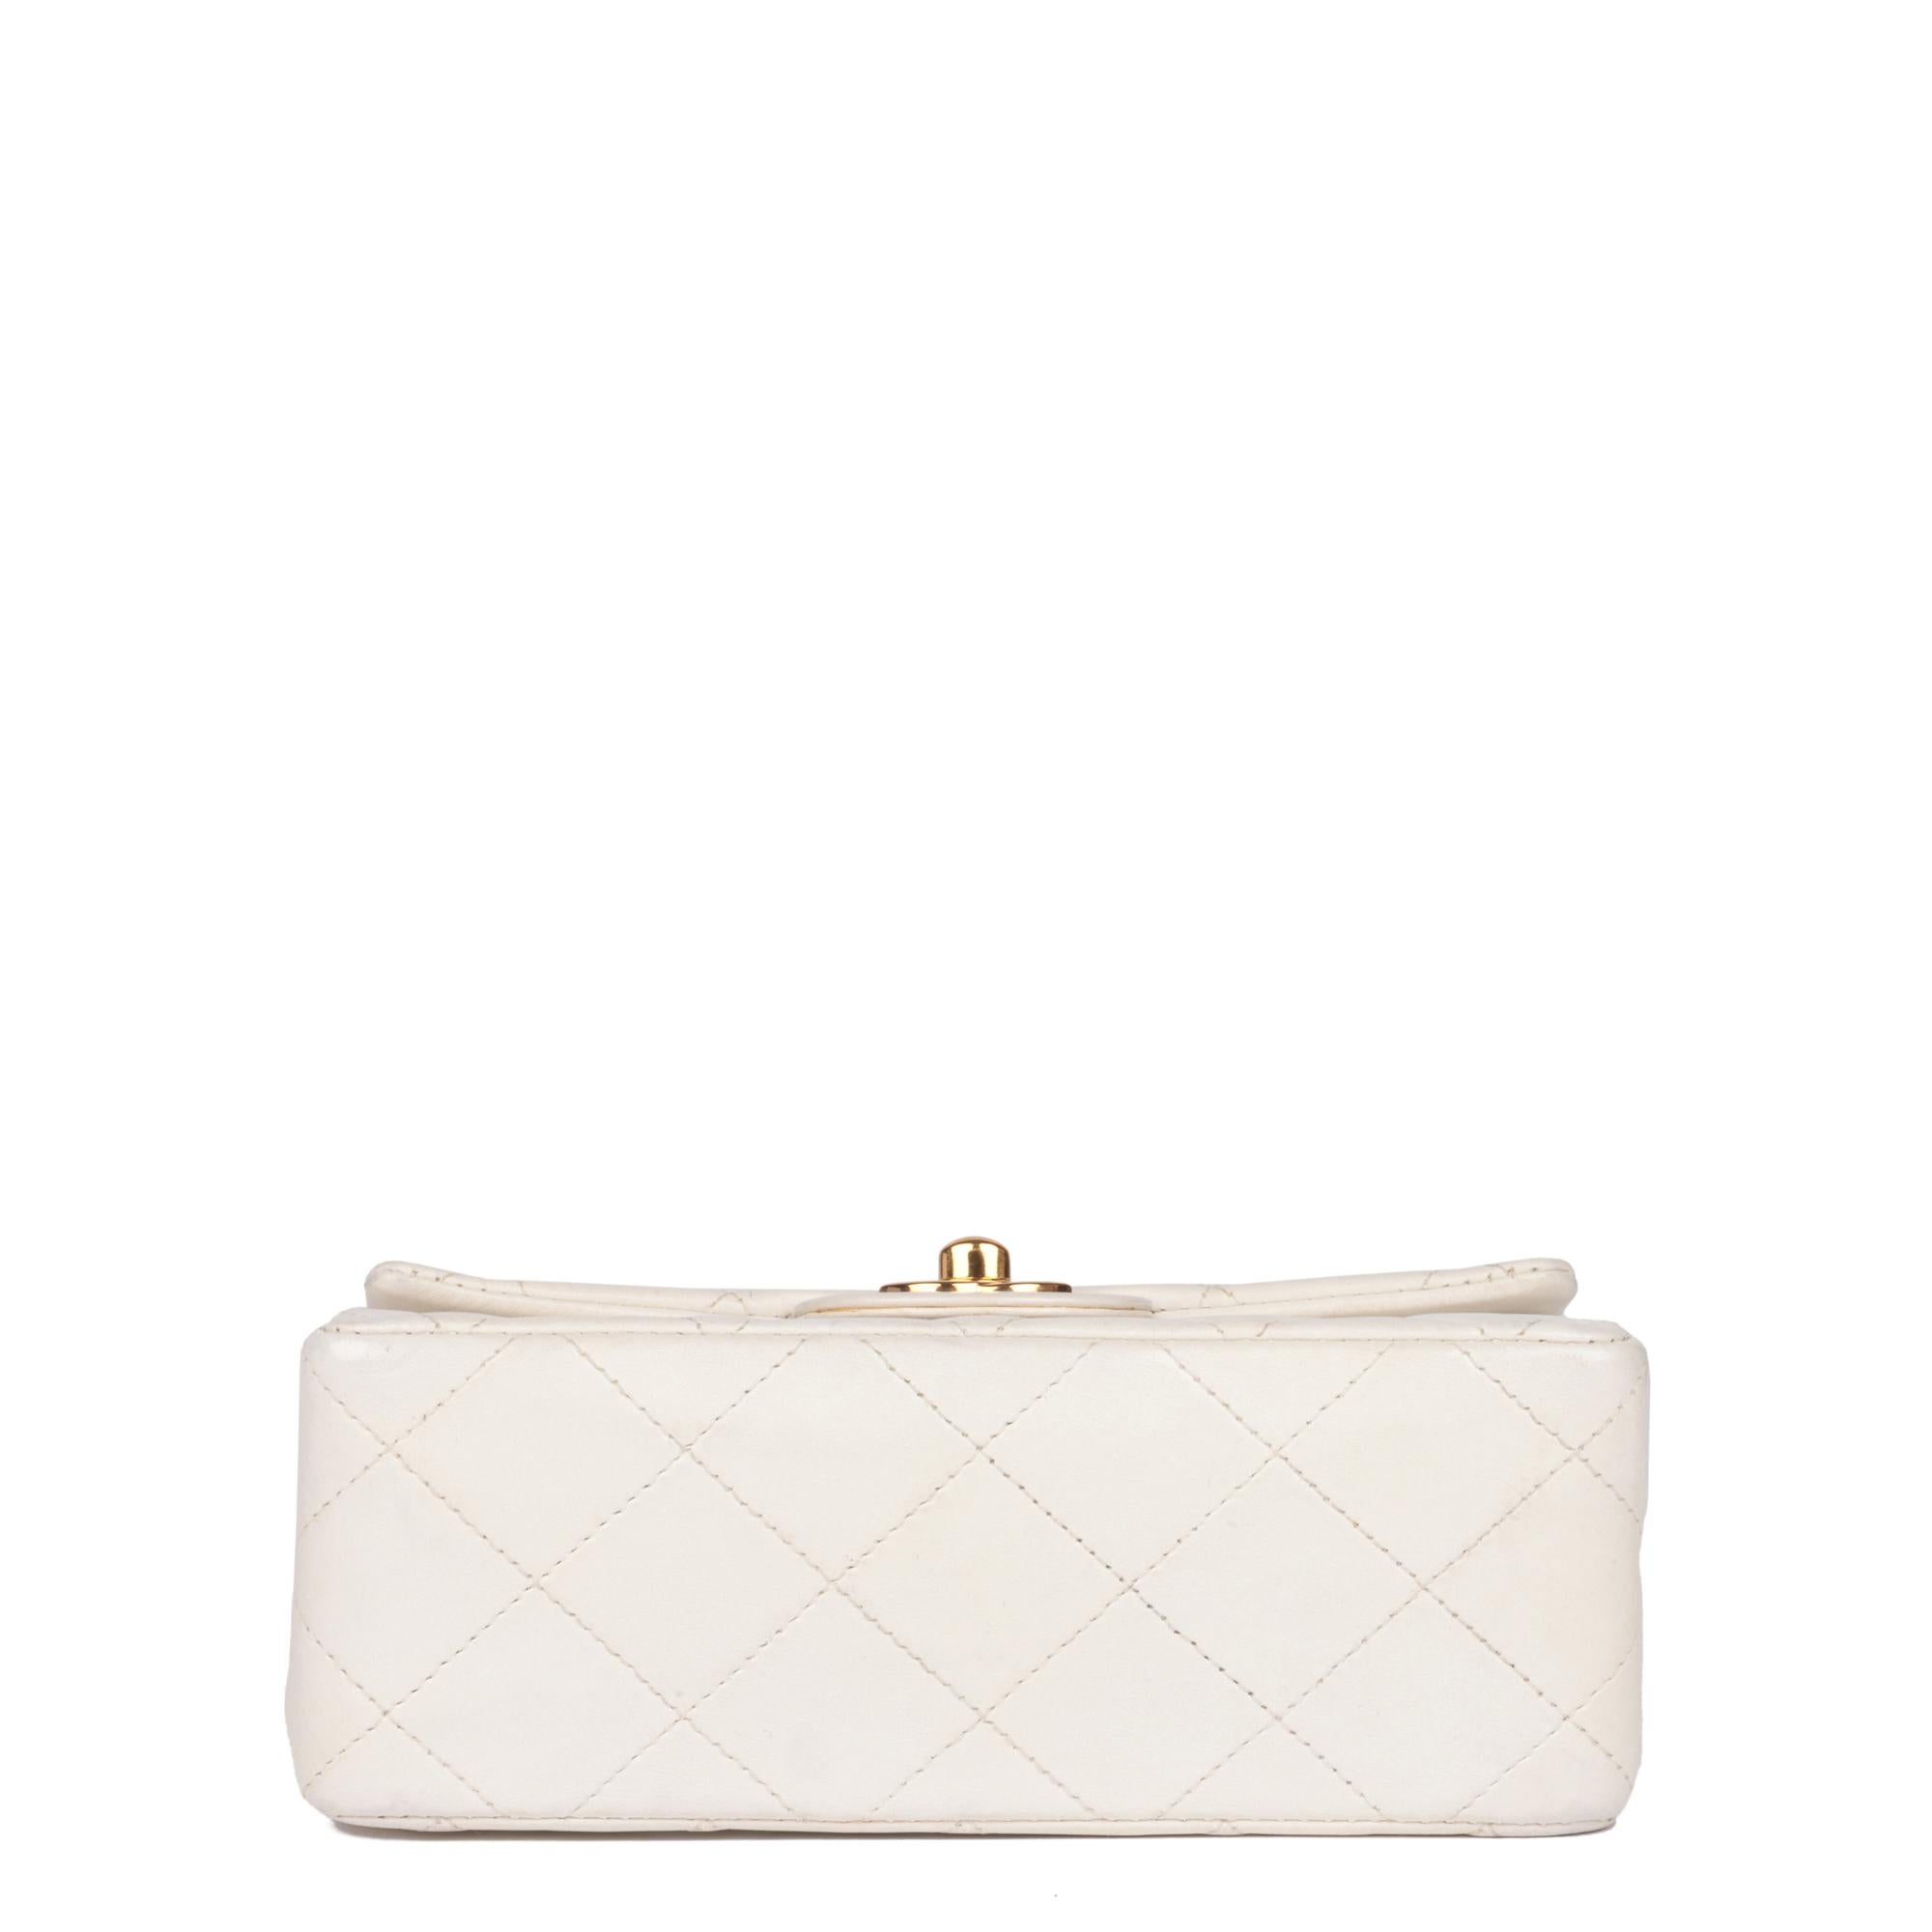 Women's CHANEL White Quilted Lambskin Vintage Square Mini Flap Bag